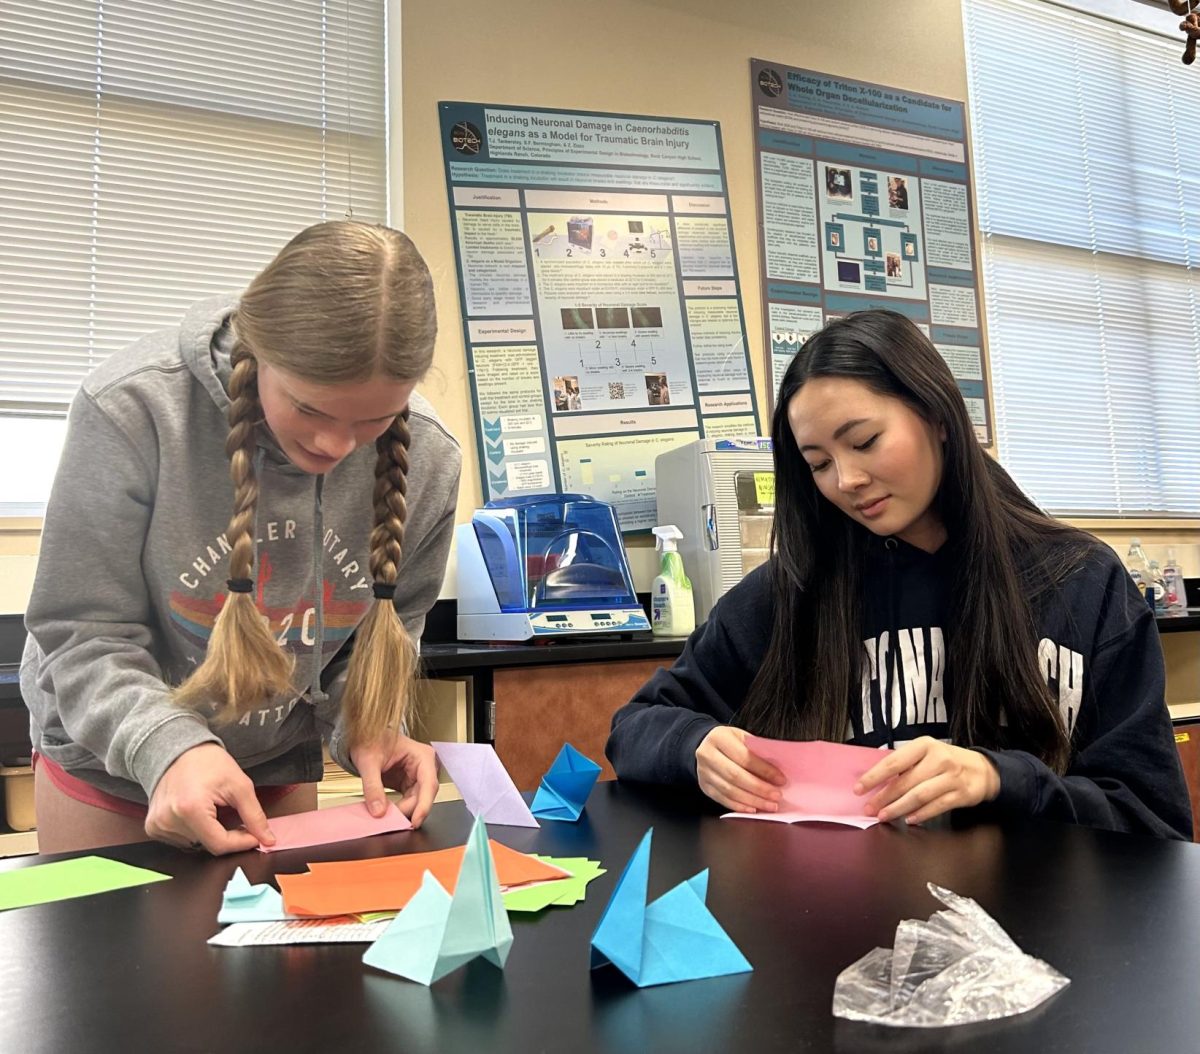 Katie Dupper ‘24 and Marabelle Cecil ‘24 fold colored squares of paper to make origami during Susanne Petri’s Seminar Feb. 1. Dupper and Cecil made origami butterflies, fortune tellers and ninja stars. “It’s like origami but for dumb people. It’s very fun and very easy,” Dupper said. “Somebody needed a piece of paper and that reminded me that I actually had a stack of origami paper. I felt compelled to create an expandable ninja star. It’s relaxing. It’s therapeutic.”